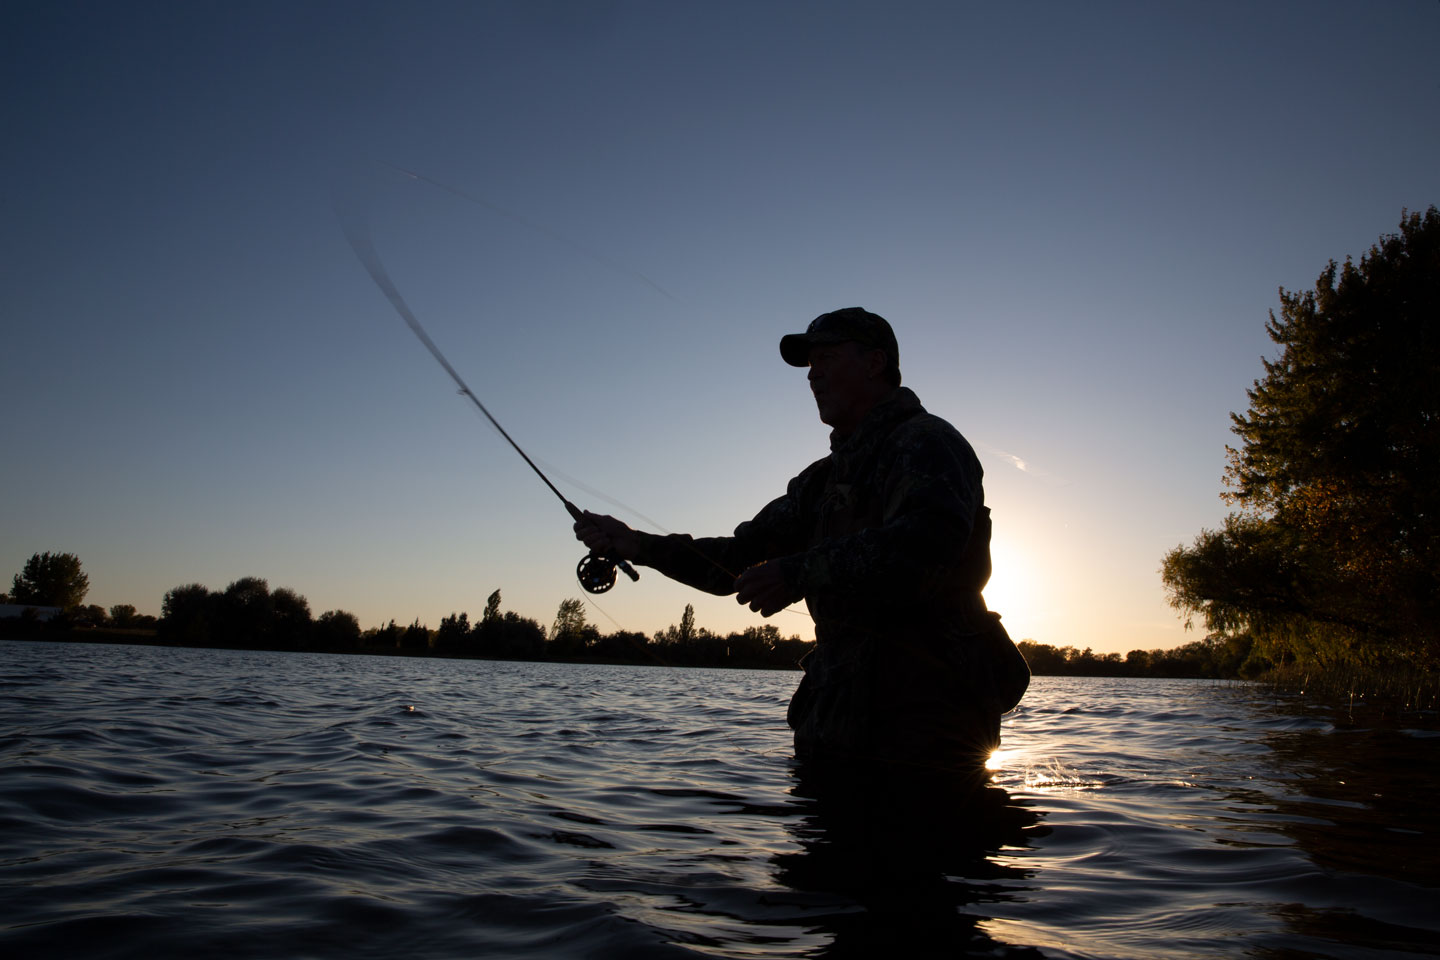 A man fly fishes at dusk while standing waist deep in War Axe lake.